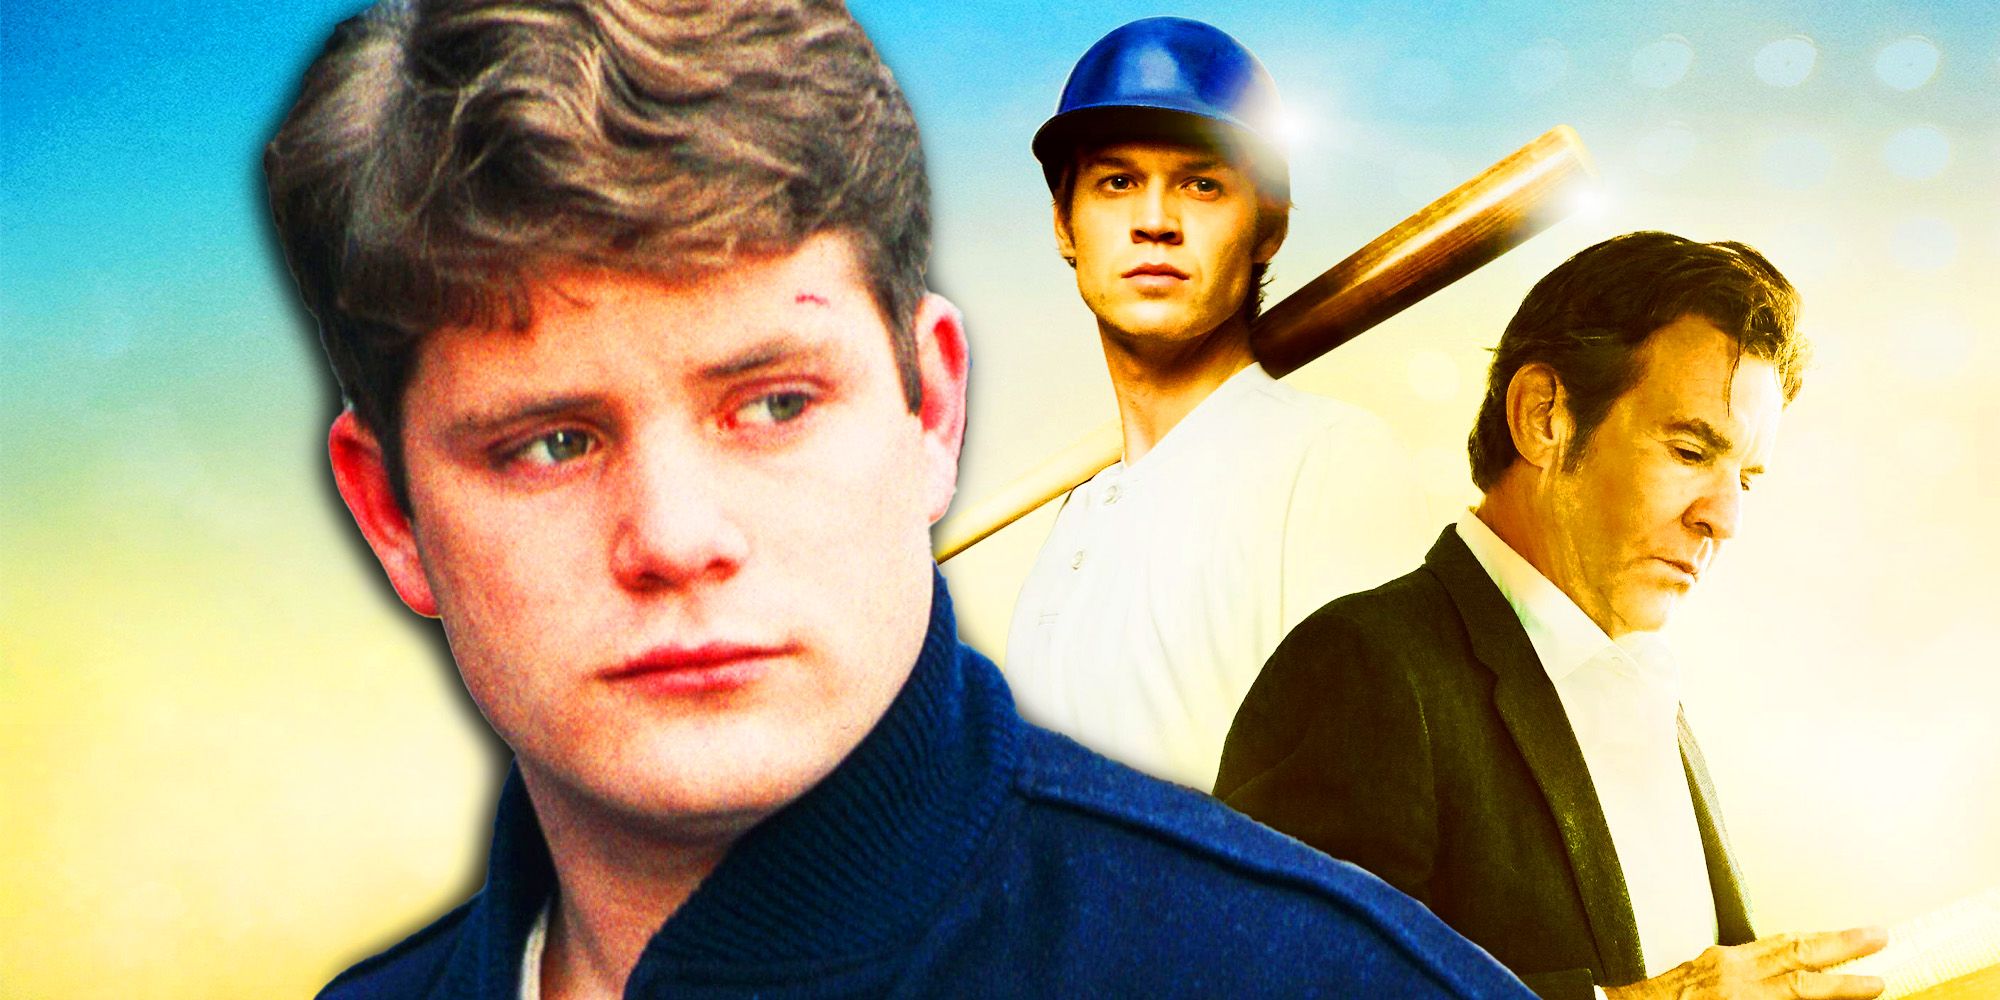 Sean Astin from Rudy and the main characters from The Hill